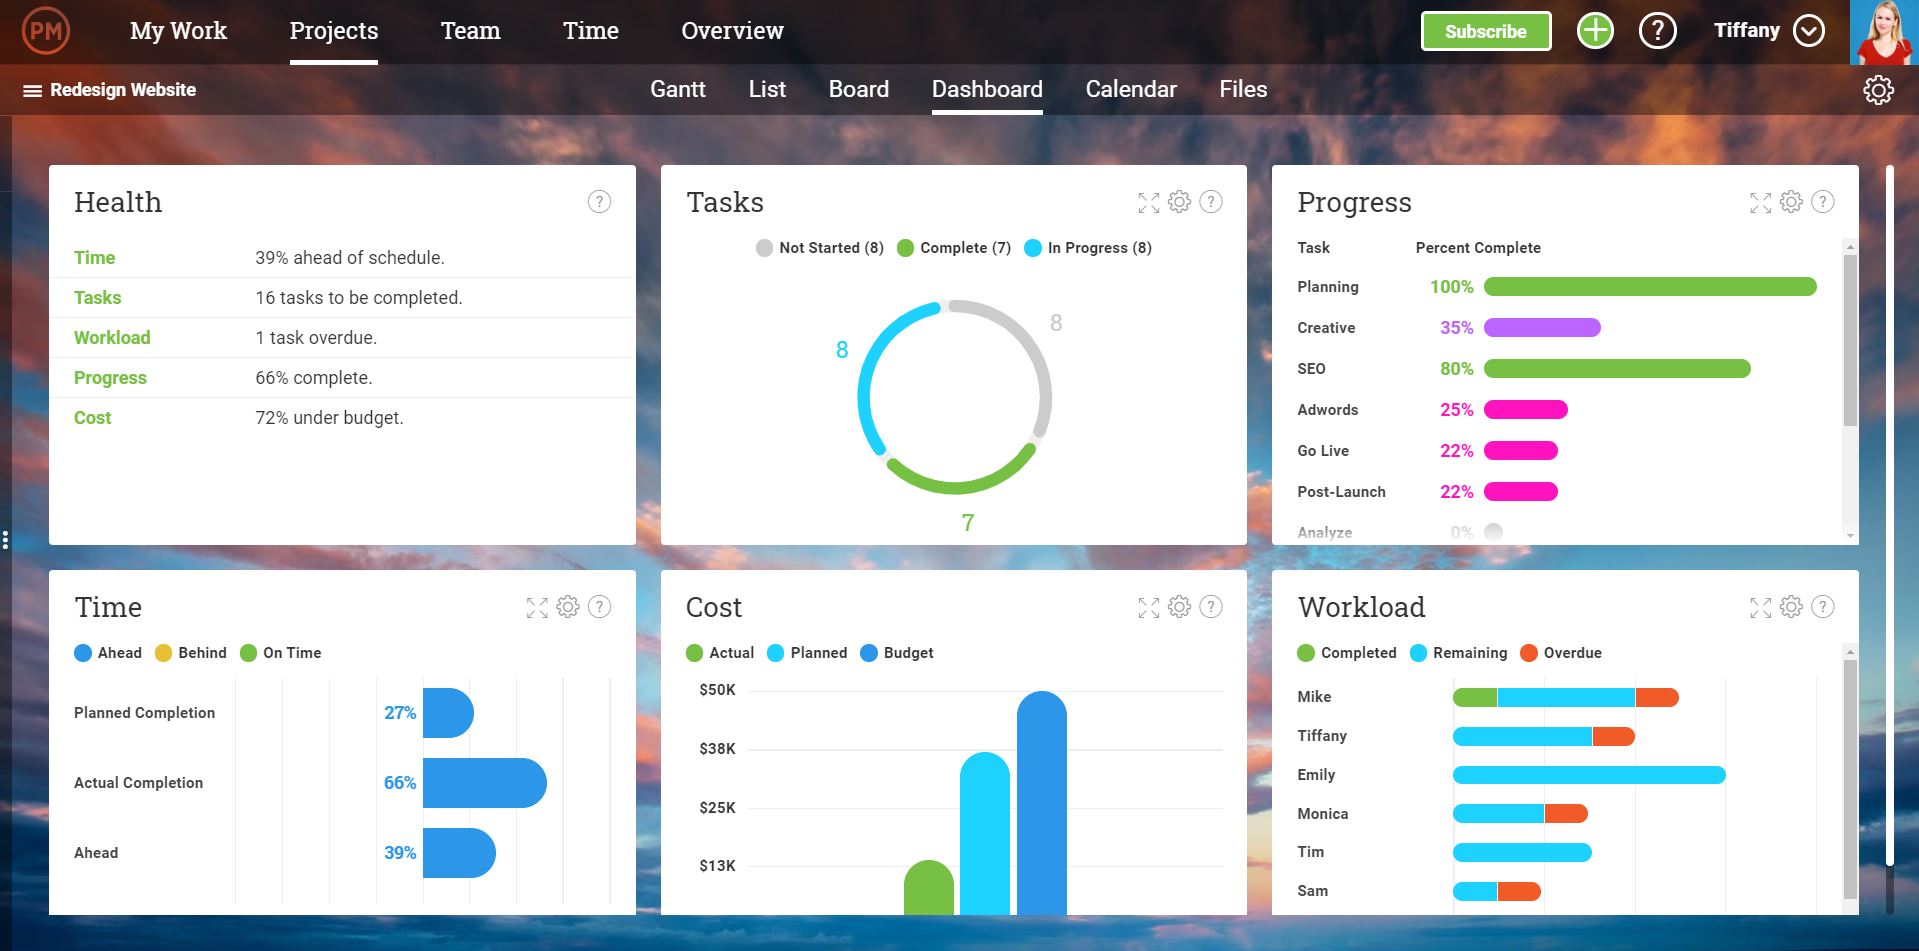 A screenshot of the real-time dashboard in ProjectManager.com, showing several key metrics on a project